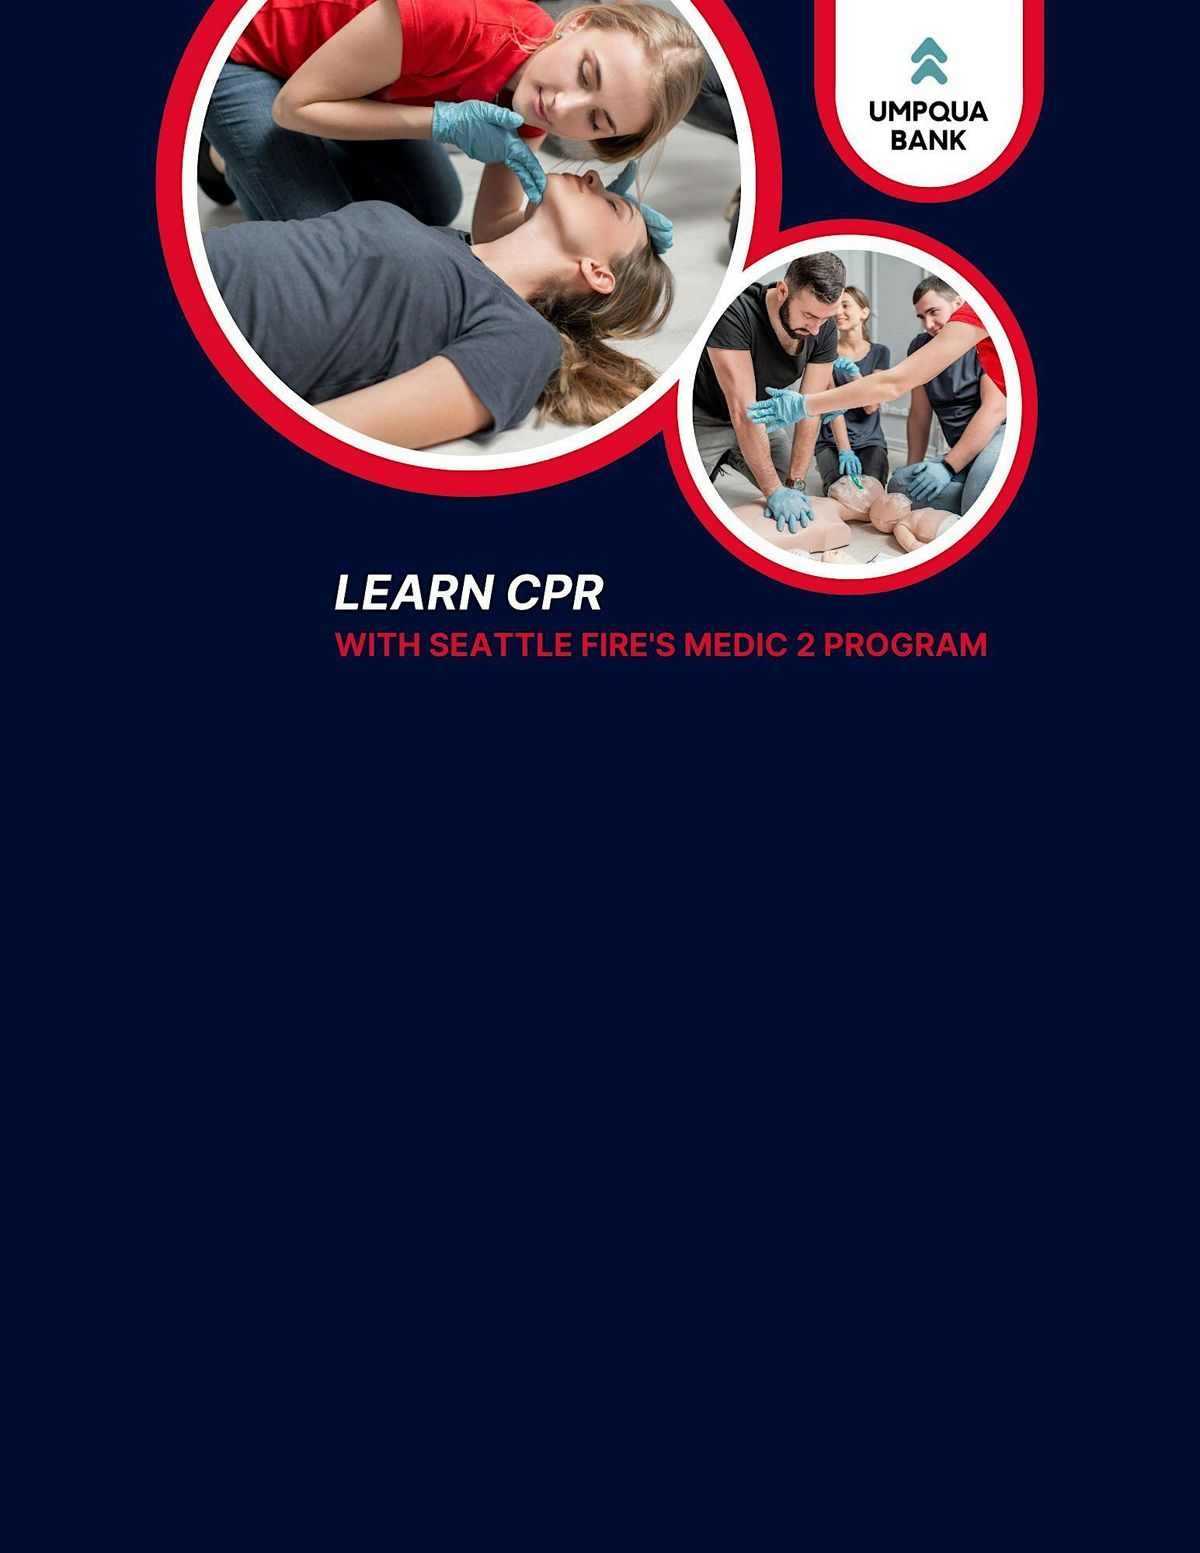 Learn CPR with Seattle Fire's Medic 2 Program